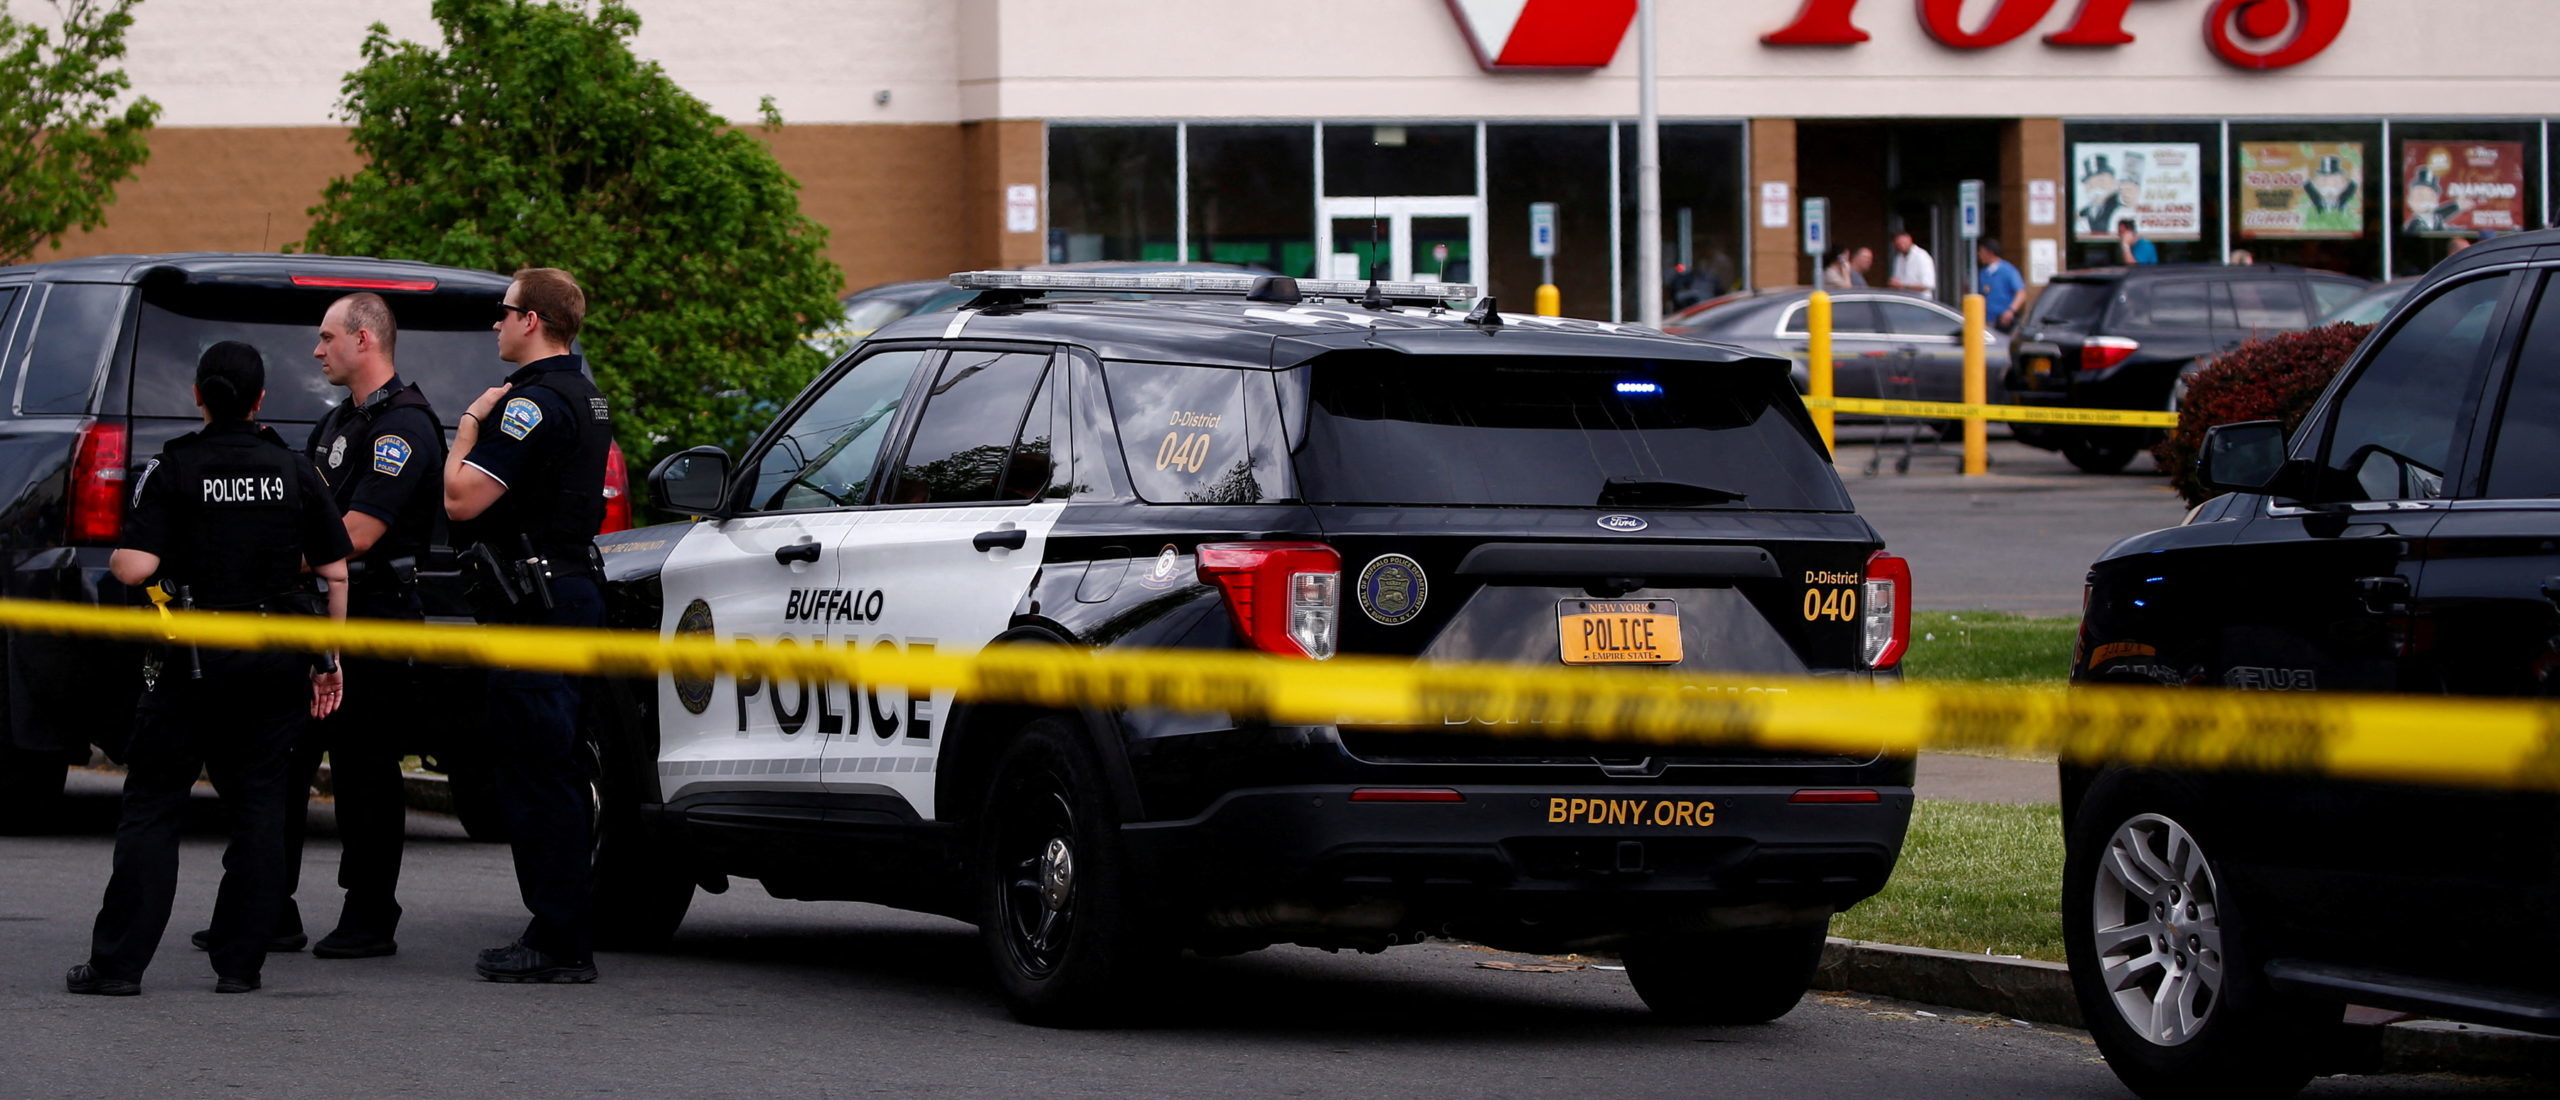 Police officers secure the scene after a shooting at TOPS supermarket in Buffalo, New York, U.S. May 14, 2022. (REUTERS/Jeffrey T. Barnes)